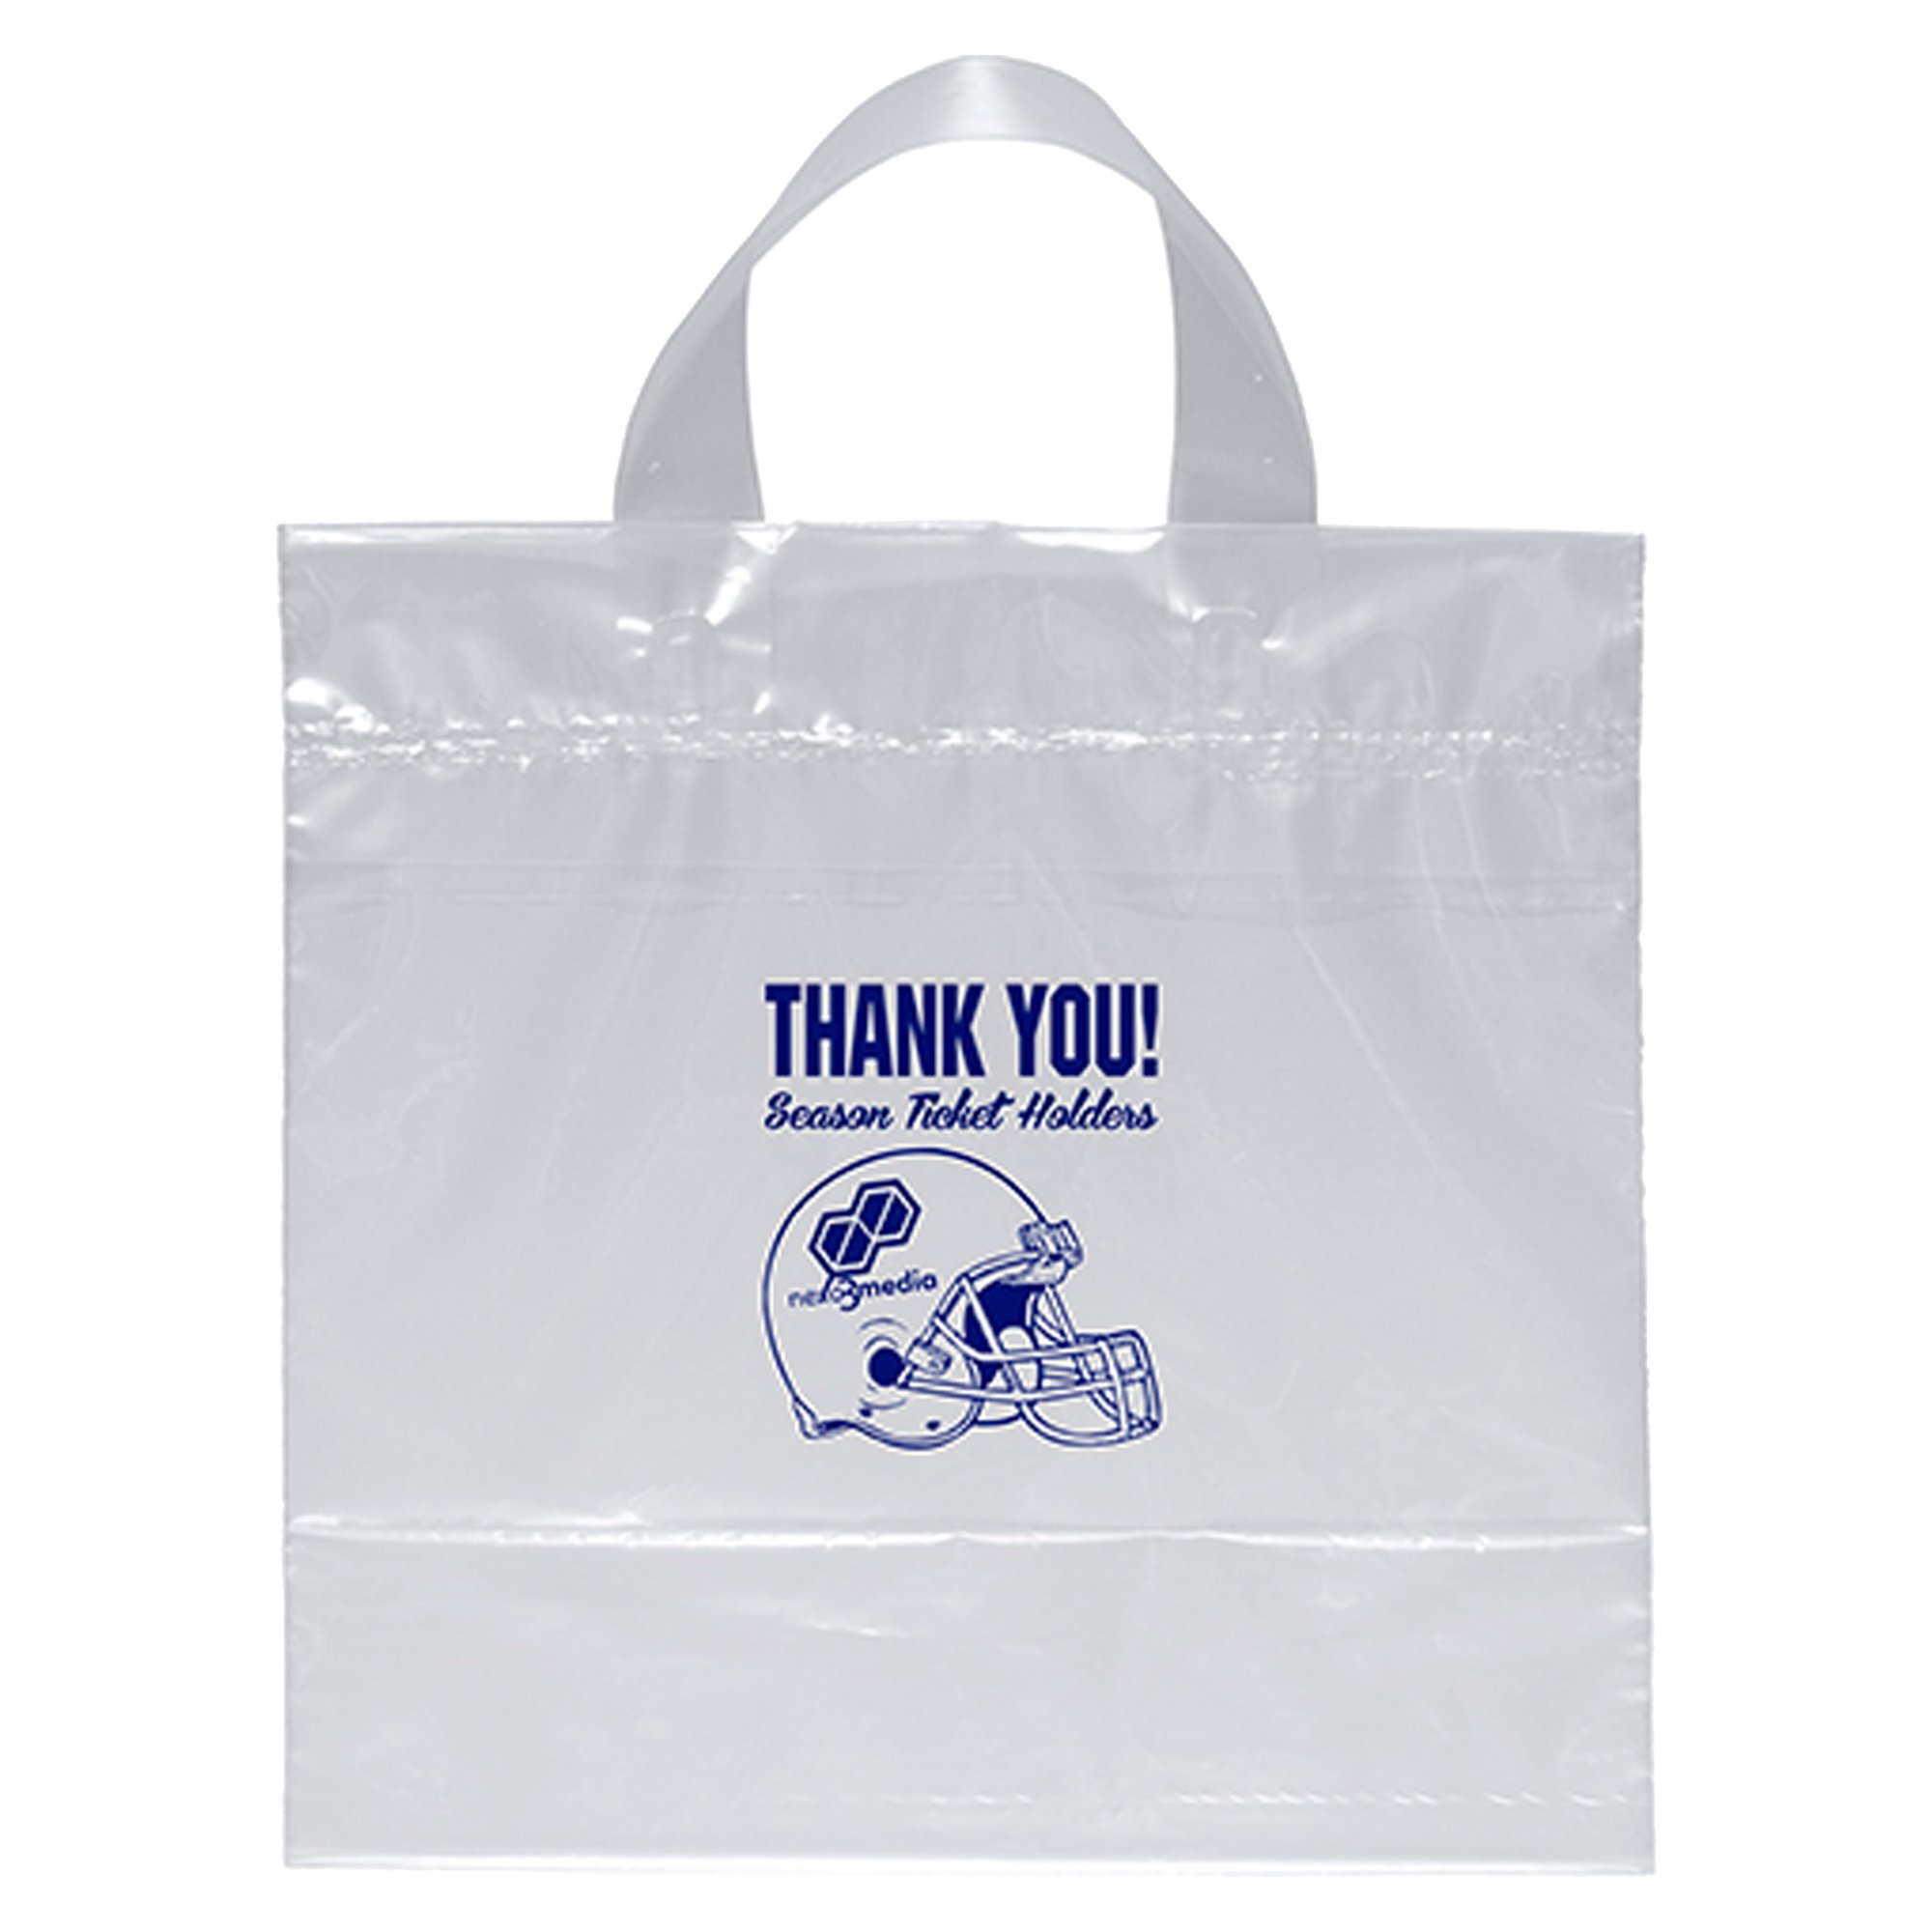 Custom Clear Plastic Tote Bags W Handles For Nfl Games National Pen